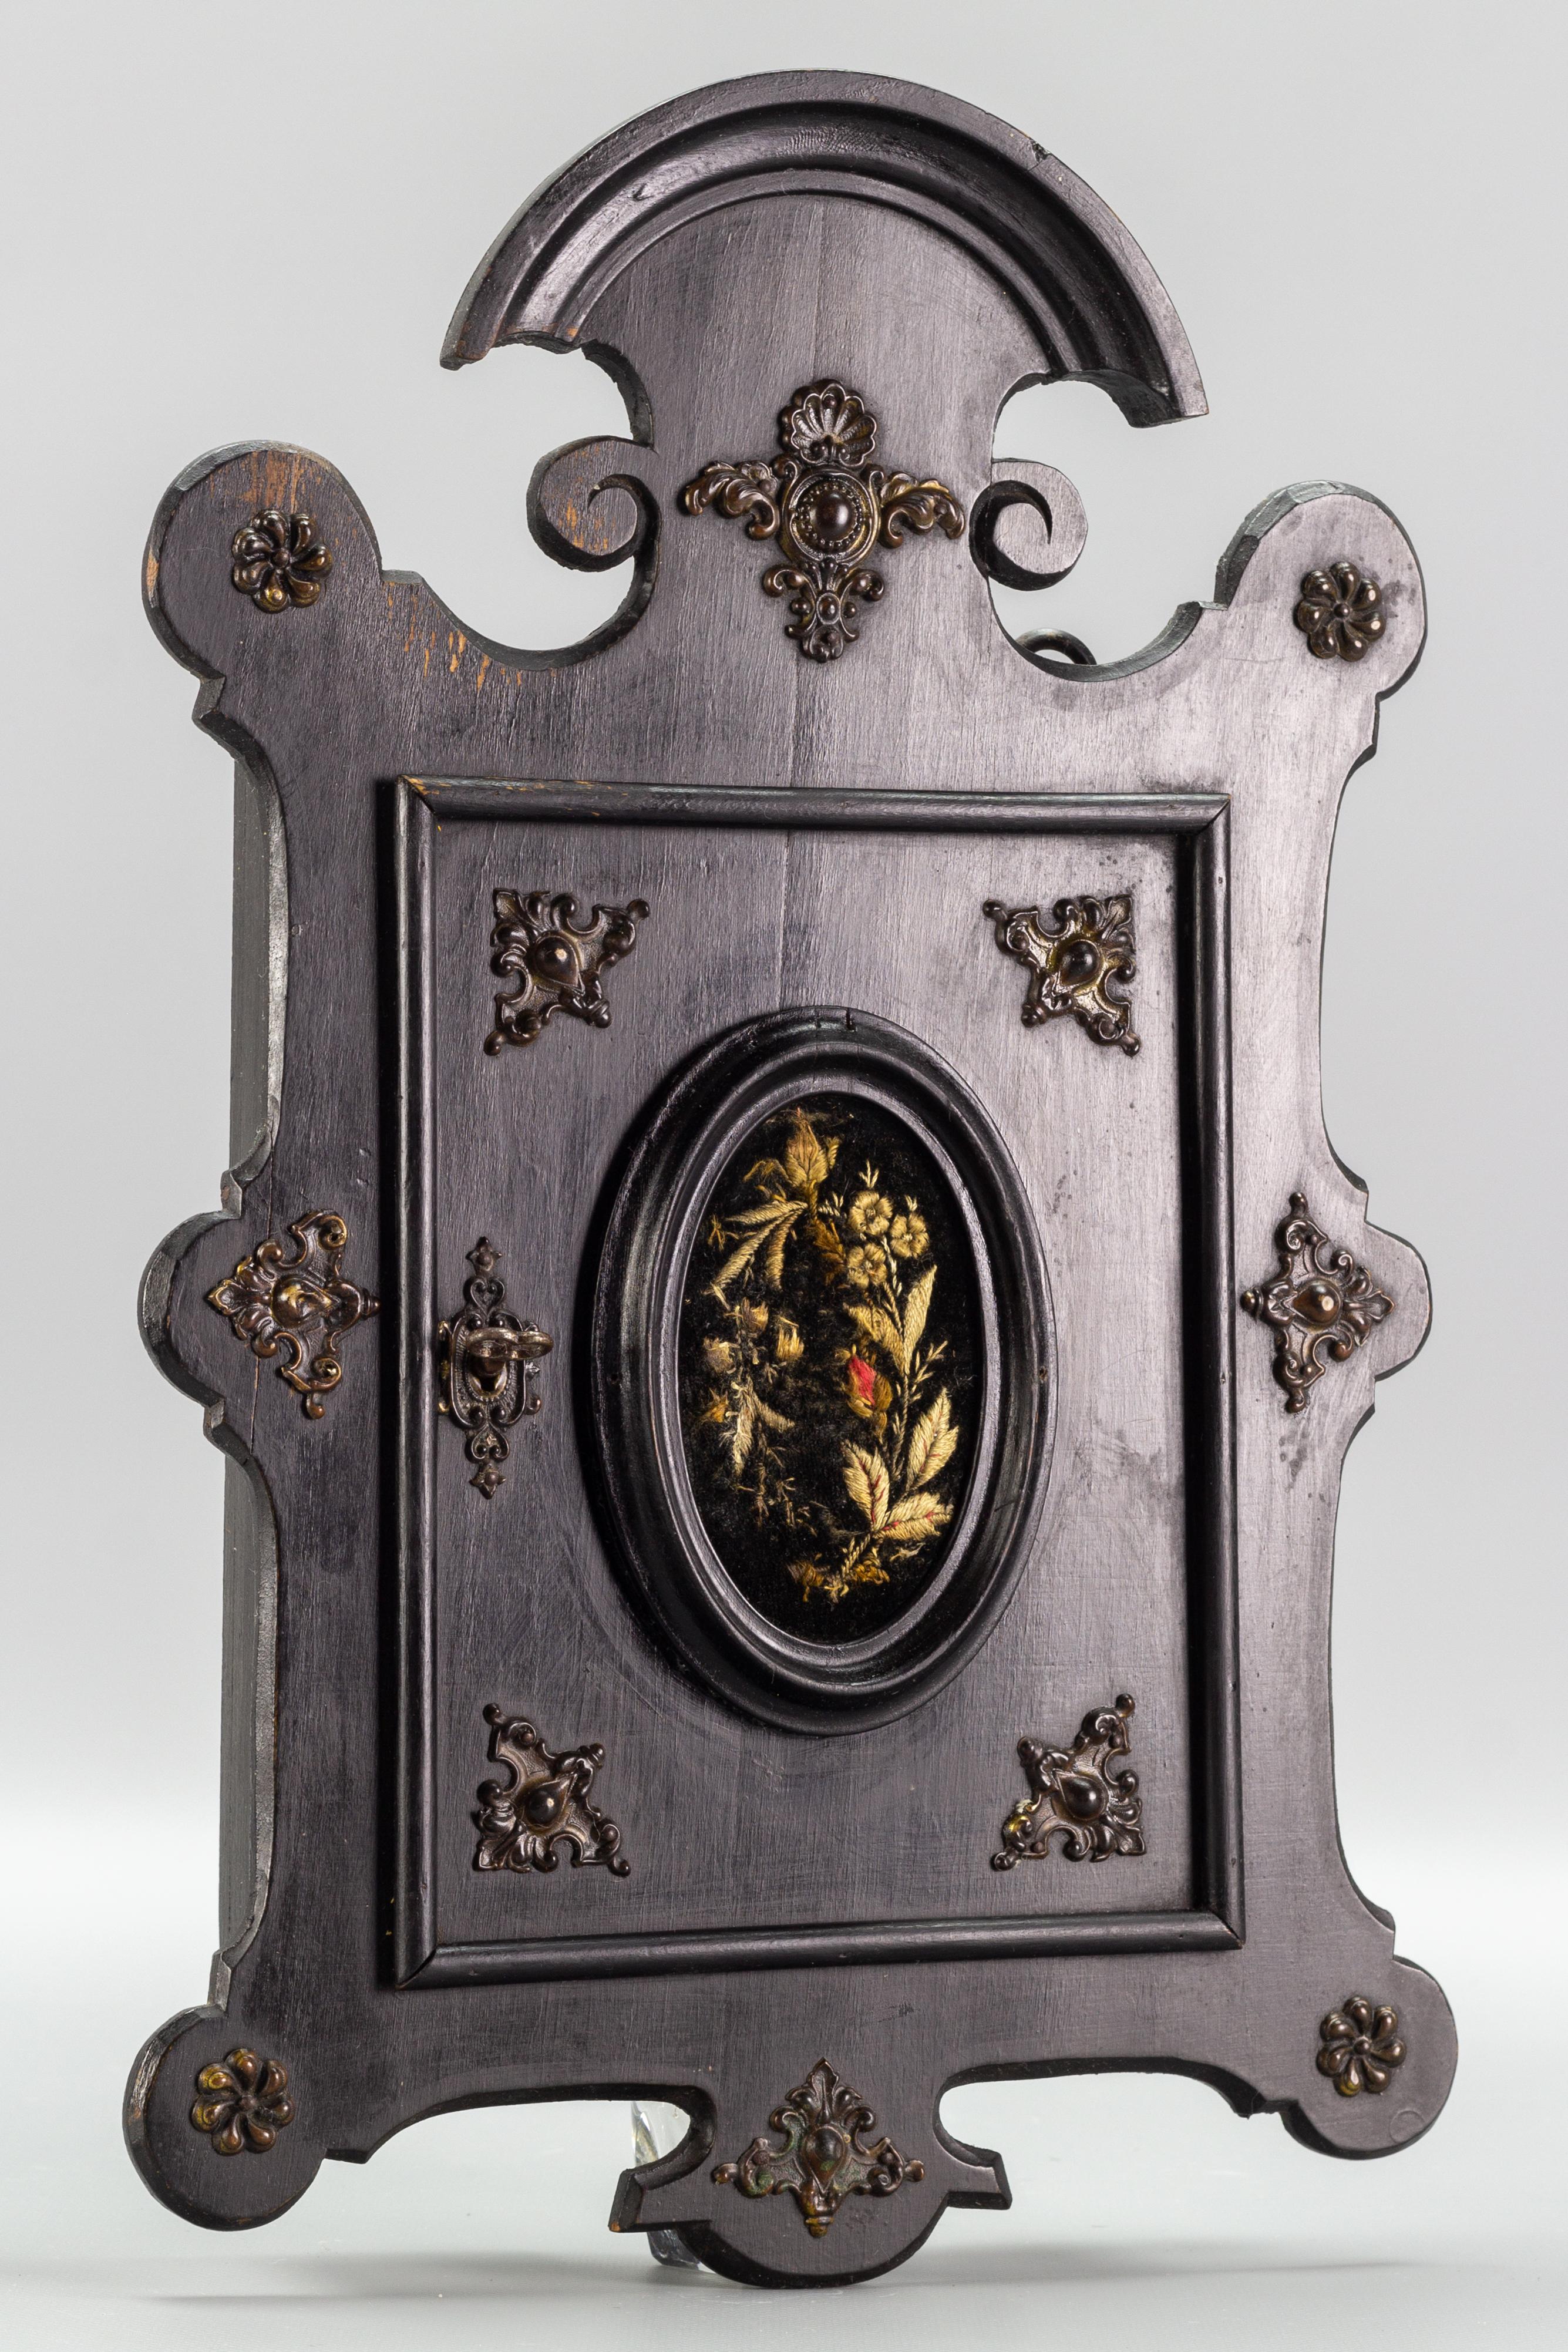 Antique Louis Philippe style black wooden wall hanging key cabinet, ca 1890.
An ornate wall-hanging key cabinet with beautiful brass decorative mounts. This wall cabinet features one door with central embroidery, opening to reveal eight metal hooks